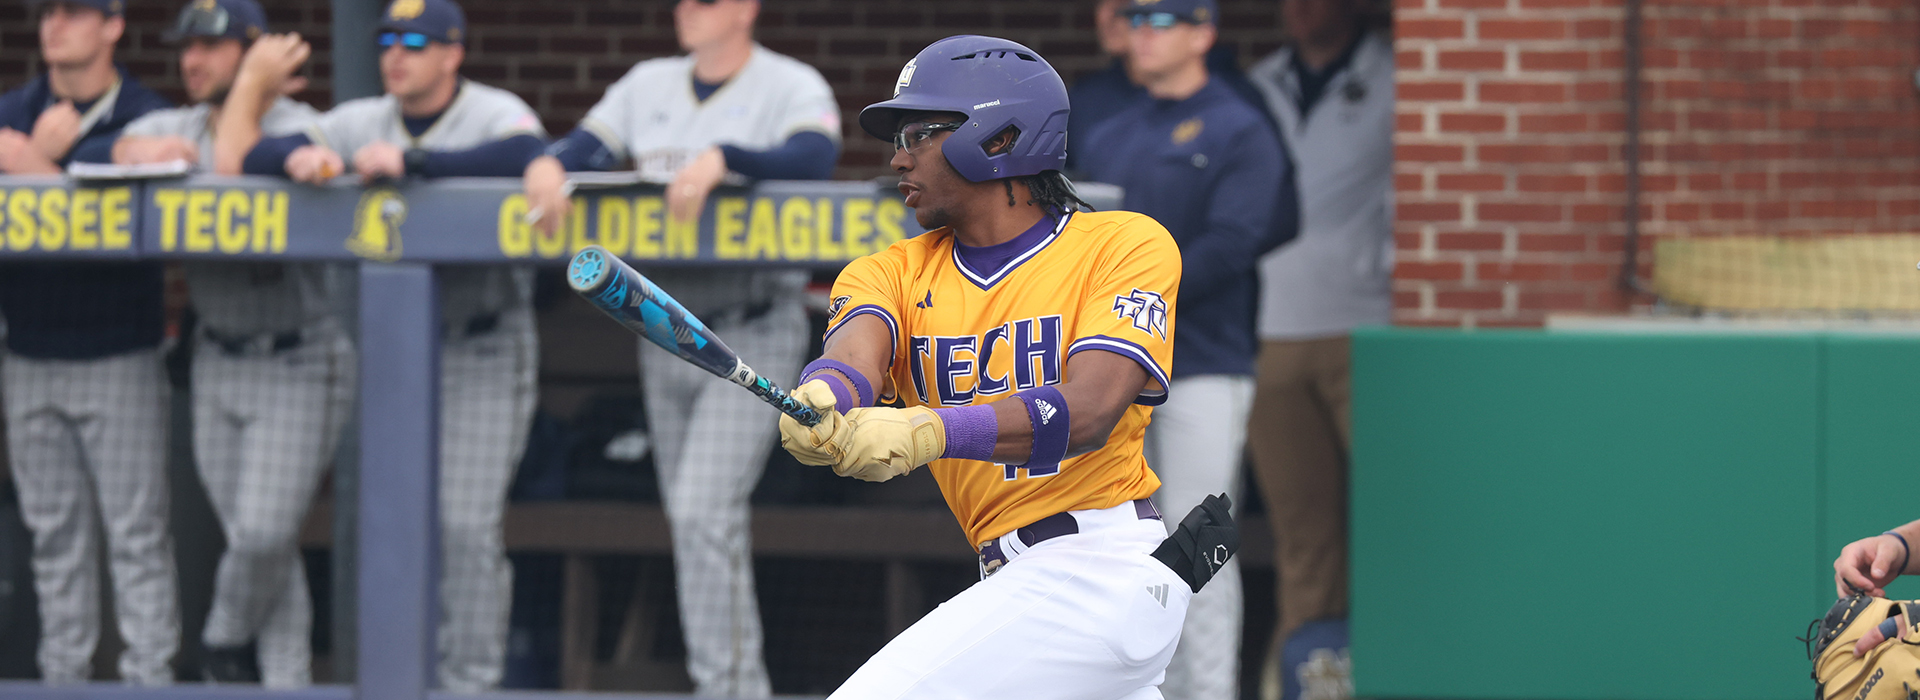 Tech stays resilient in extra-innings win at USI in OVC opener